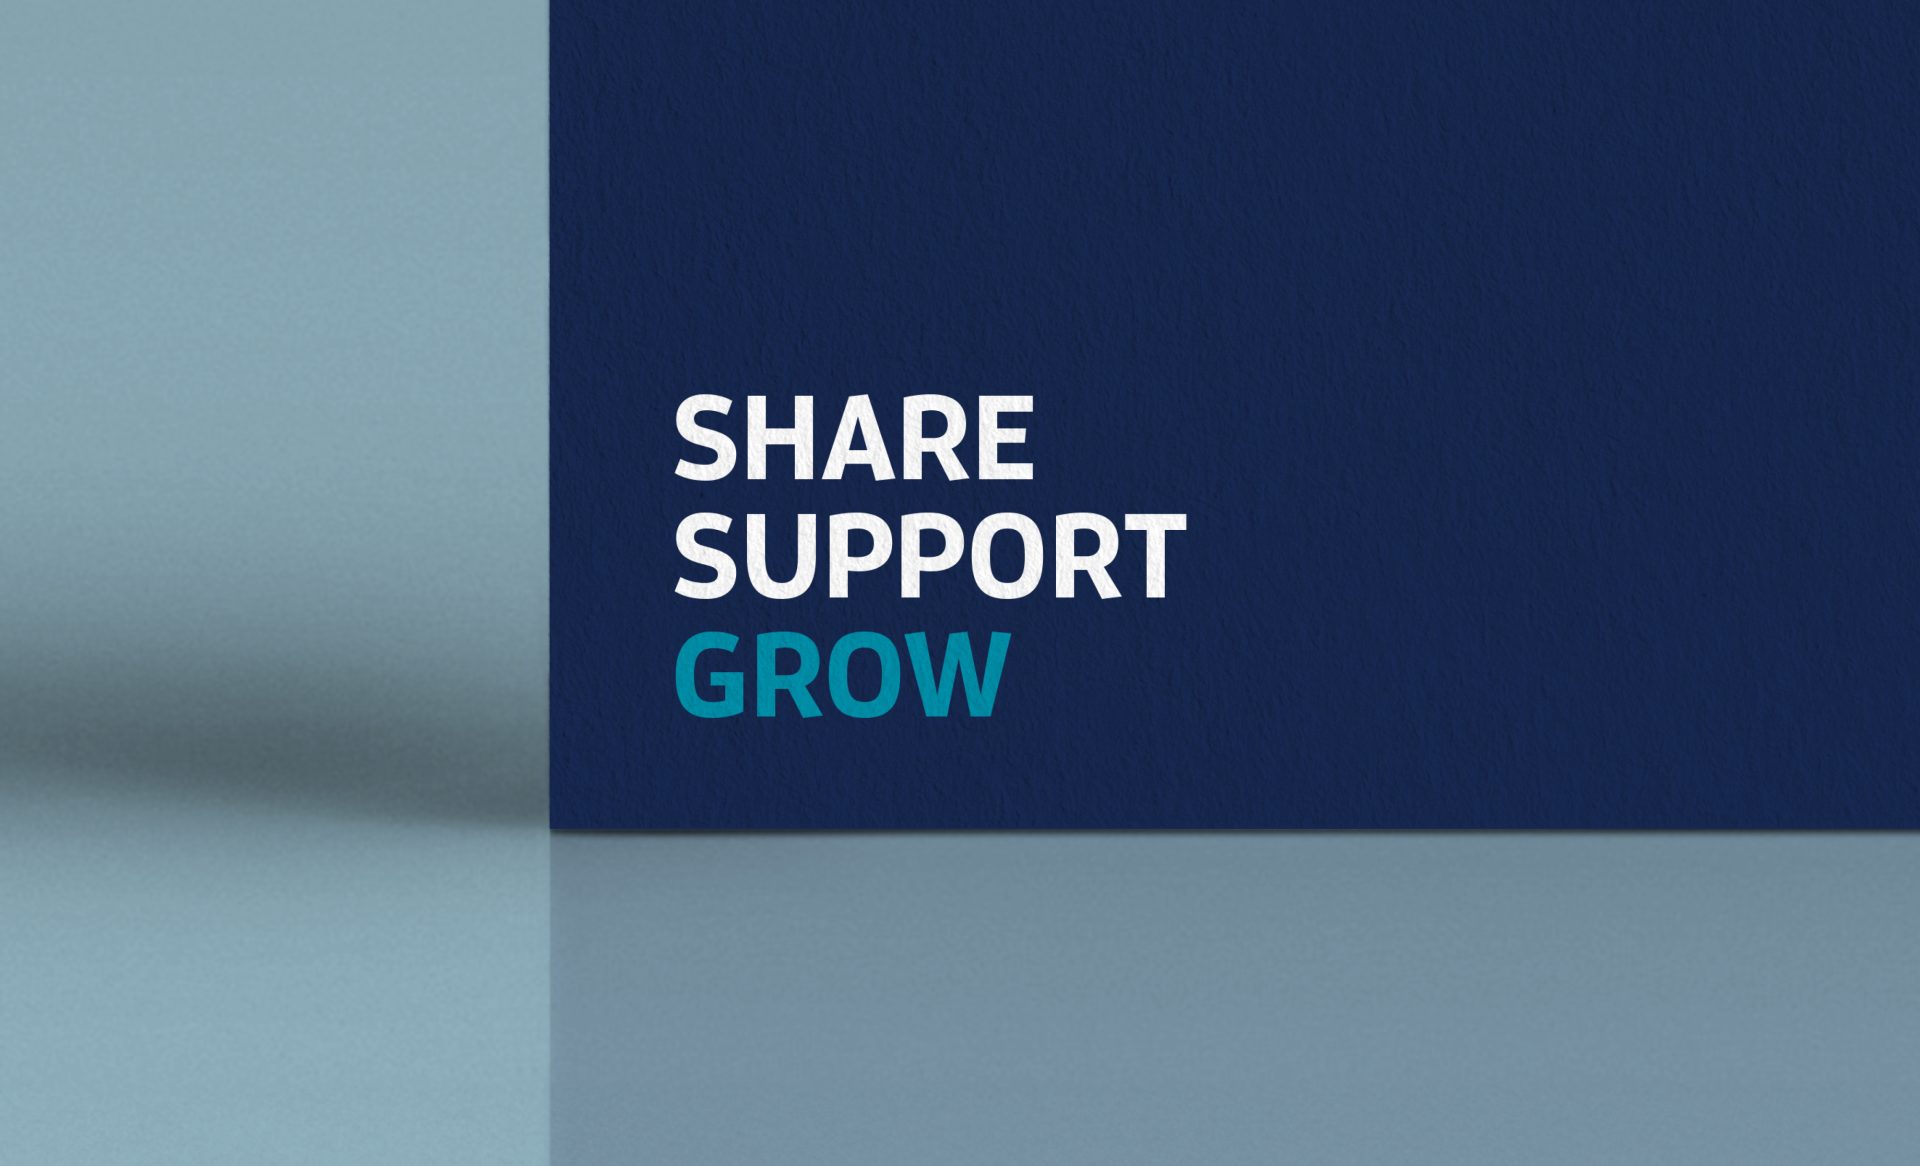 Share. Support. Grow.